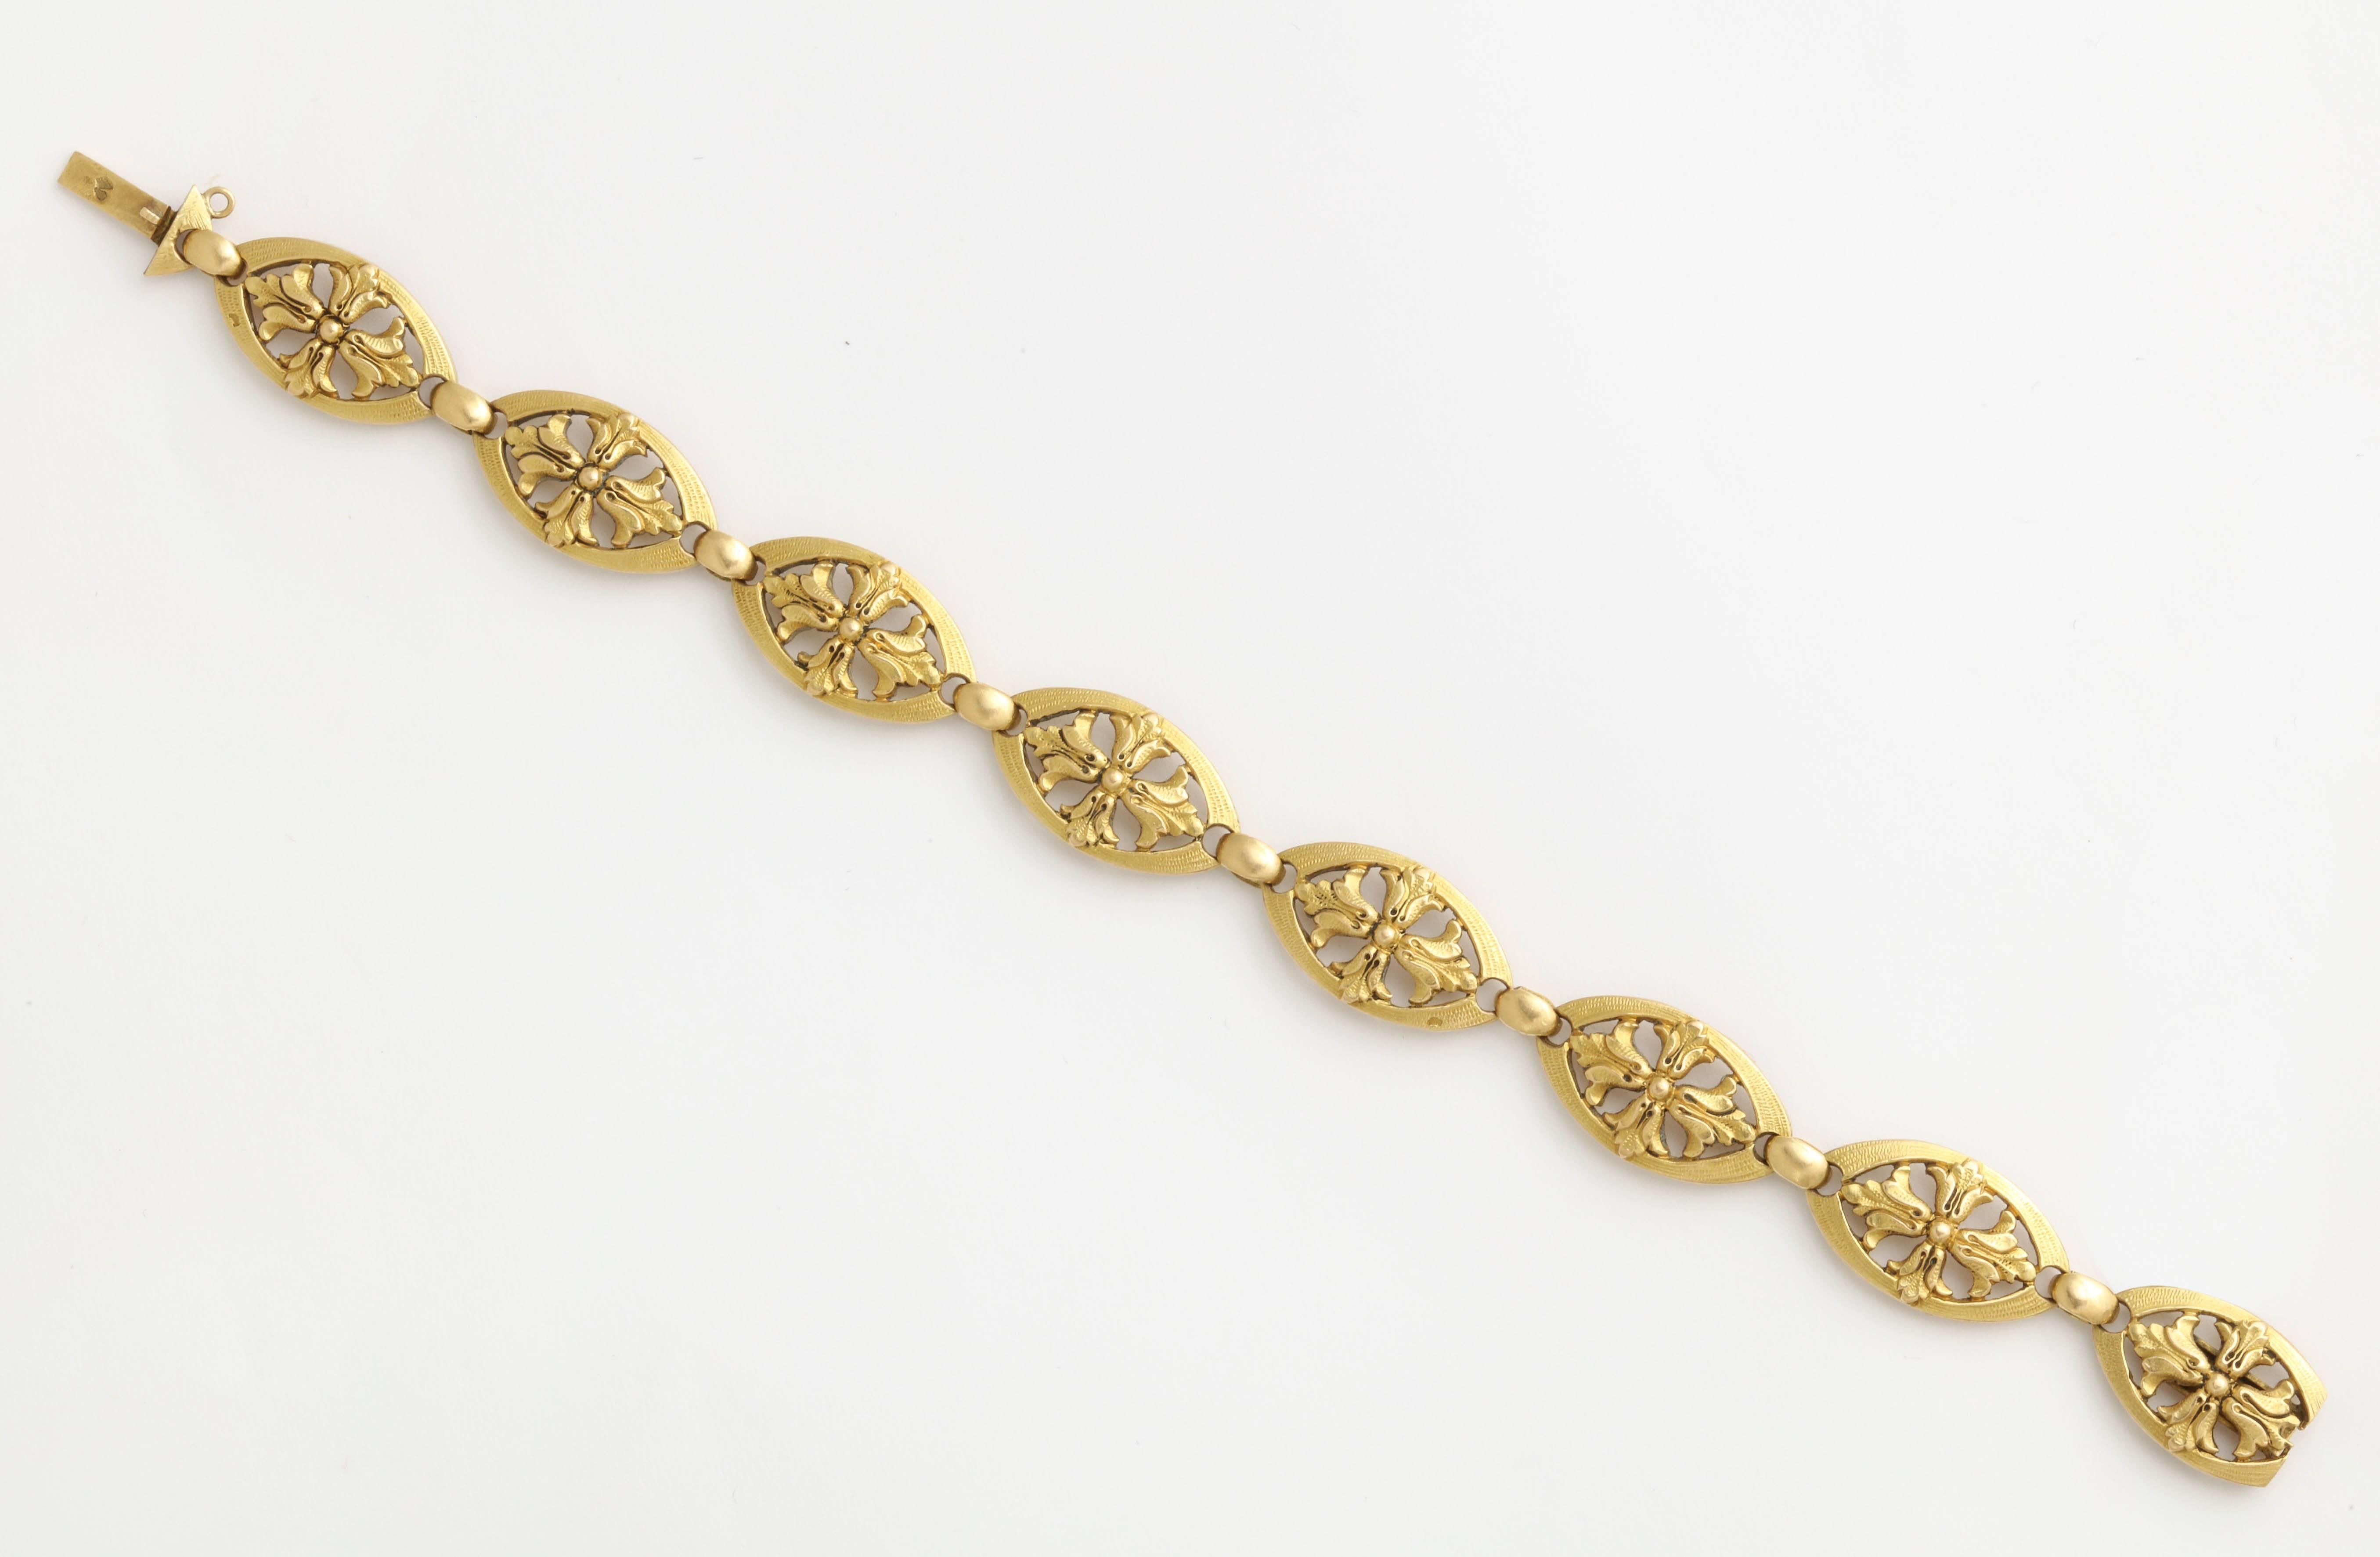 This beautiful link bracelet in 18K yellow gold is French Art Nouveau and hallmarked on the clasp. 